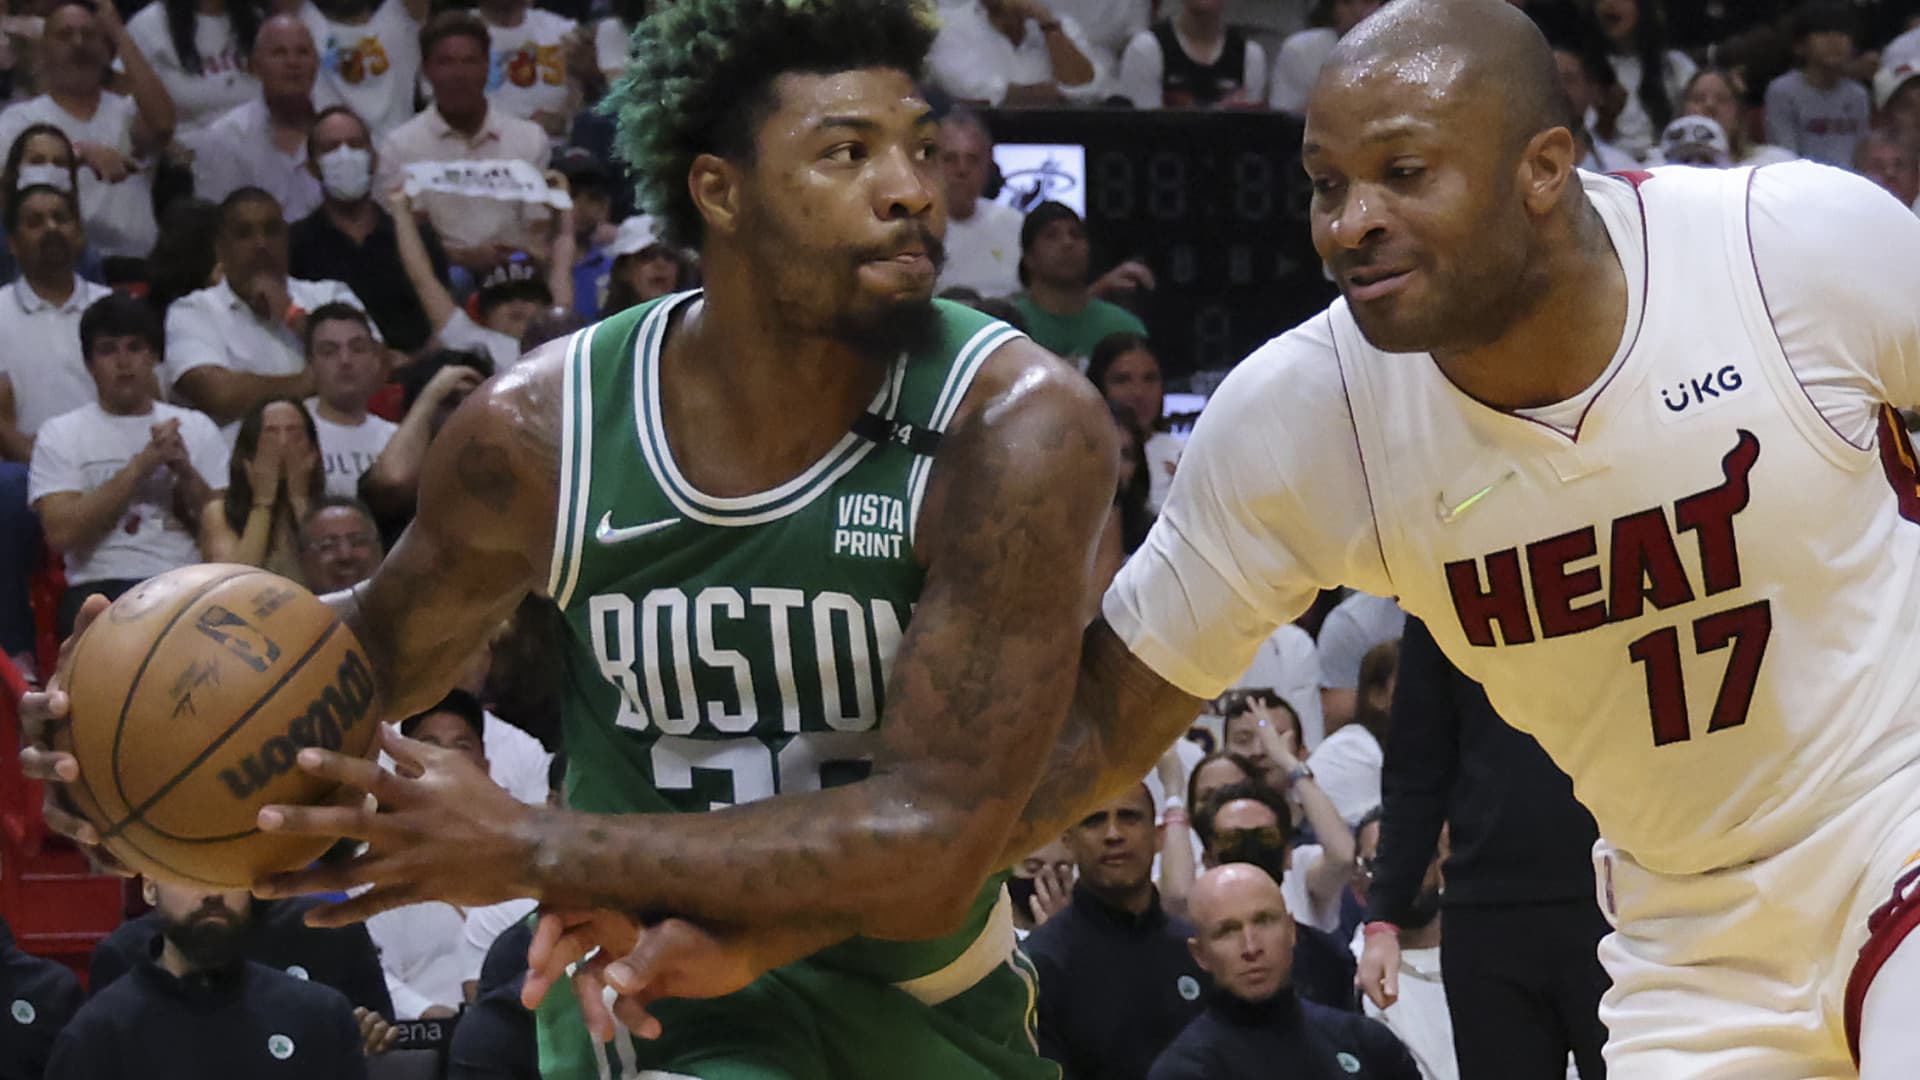 Boston Celtics guard Marcus Smart (36) is fouled by Miami Heat forward P.J. Tucker (17) during the first quarter. The Miami Heat host the Boston Celtics during game 2 in the NBA Eastern Conference Finals at FTX Arena in Miami, FL on May 19, 2022.